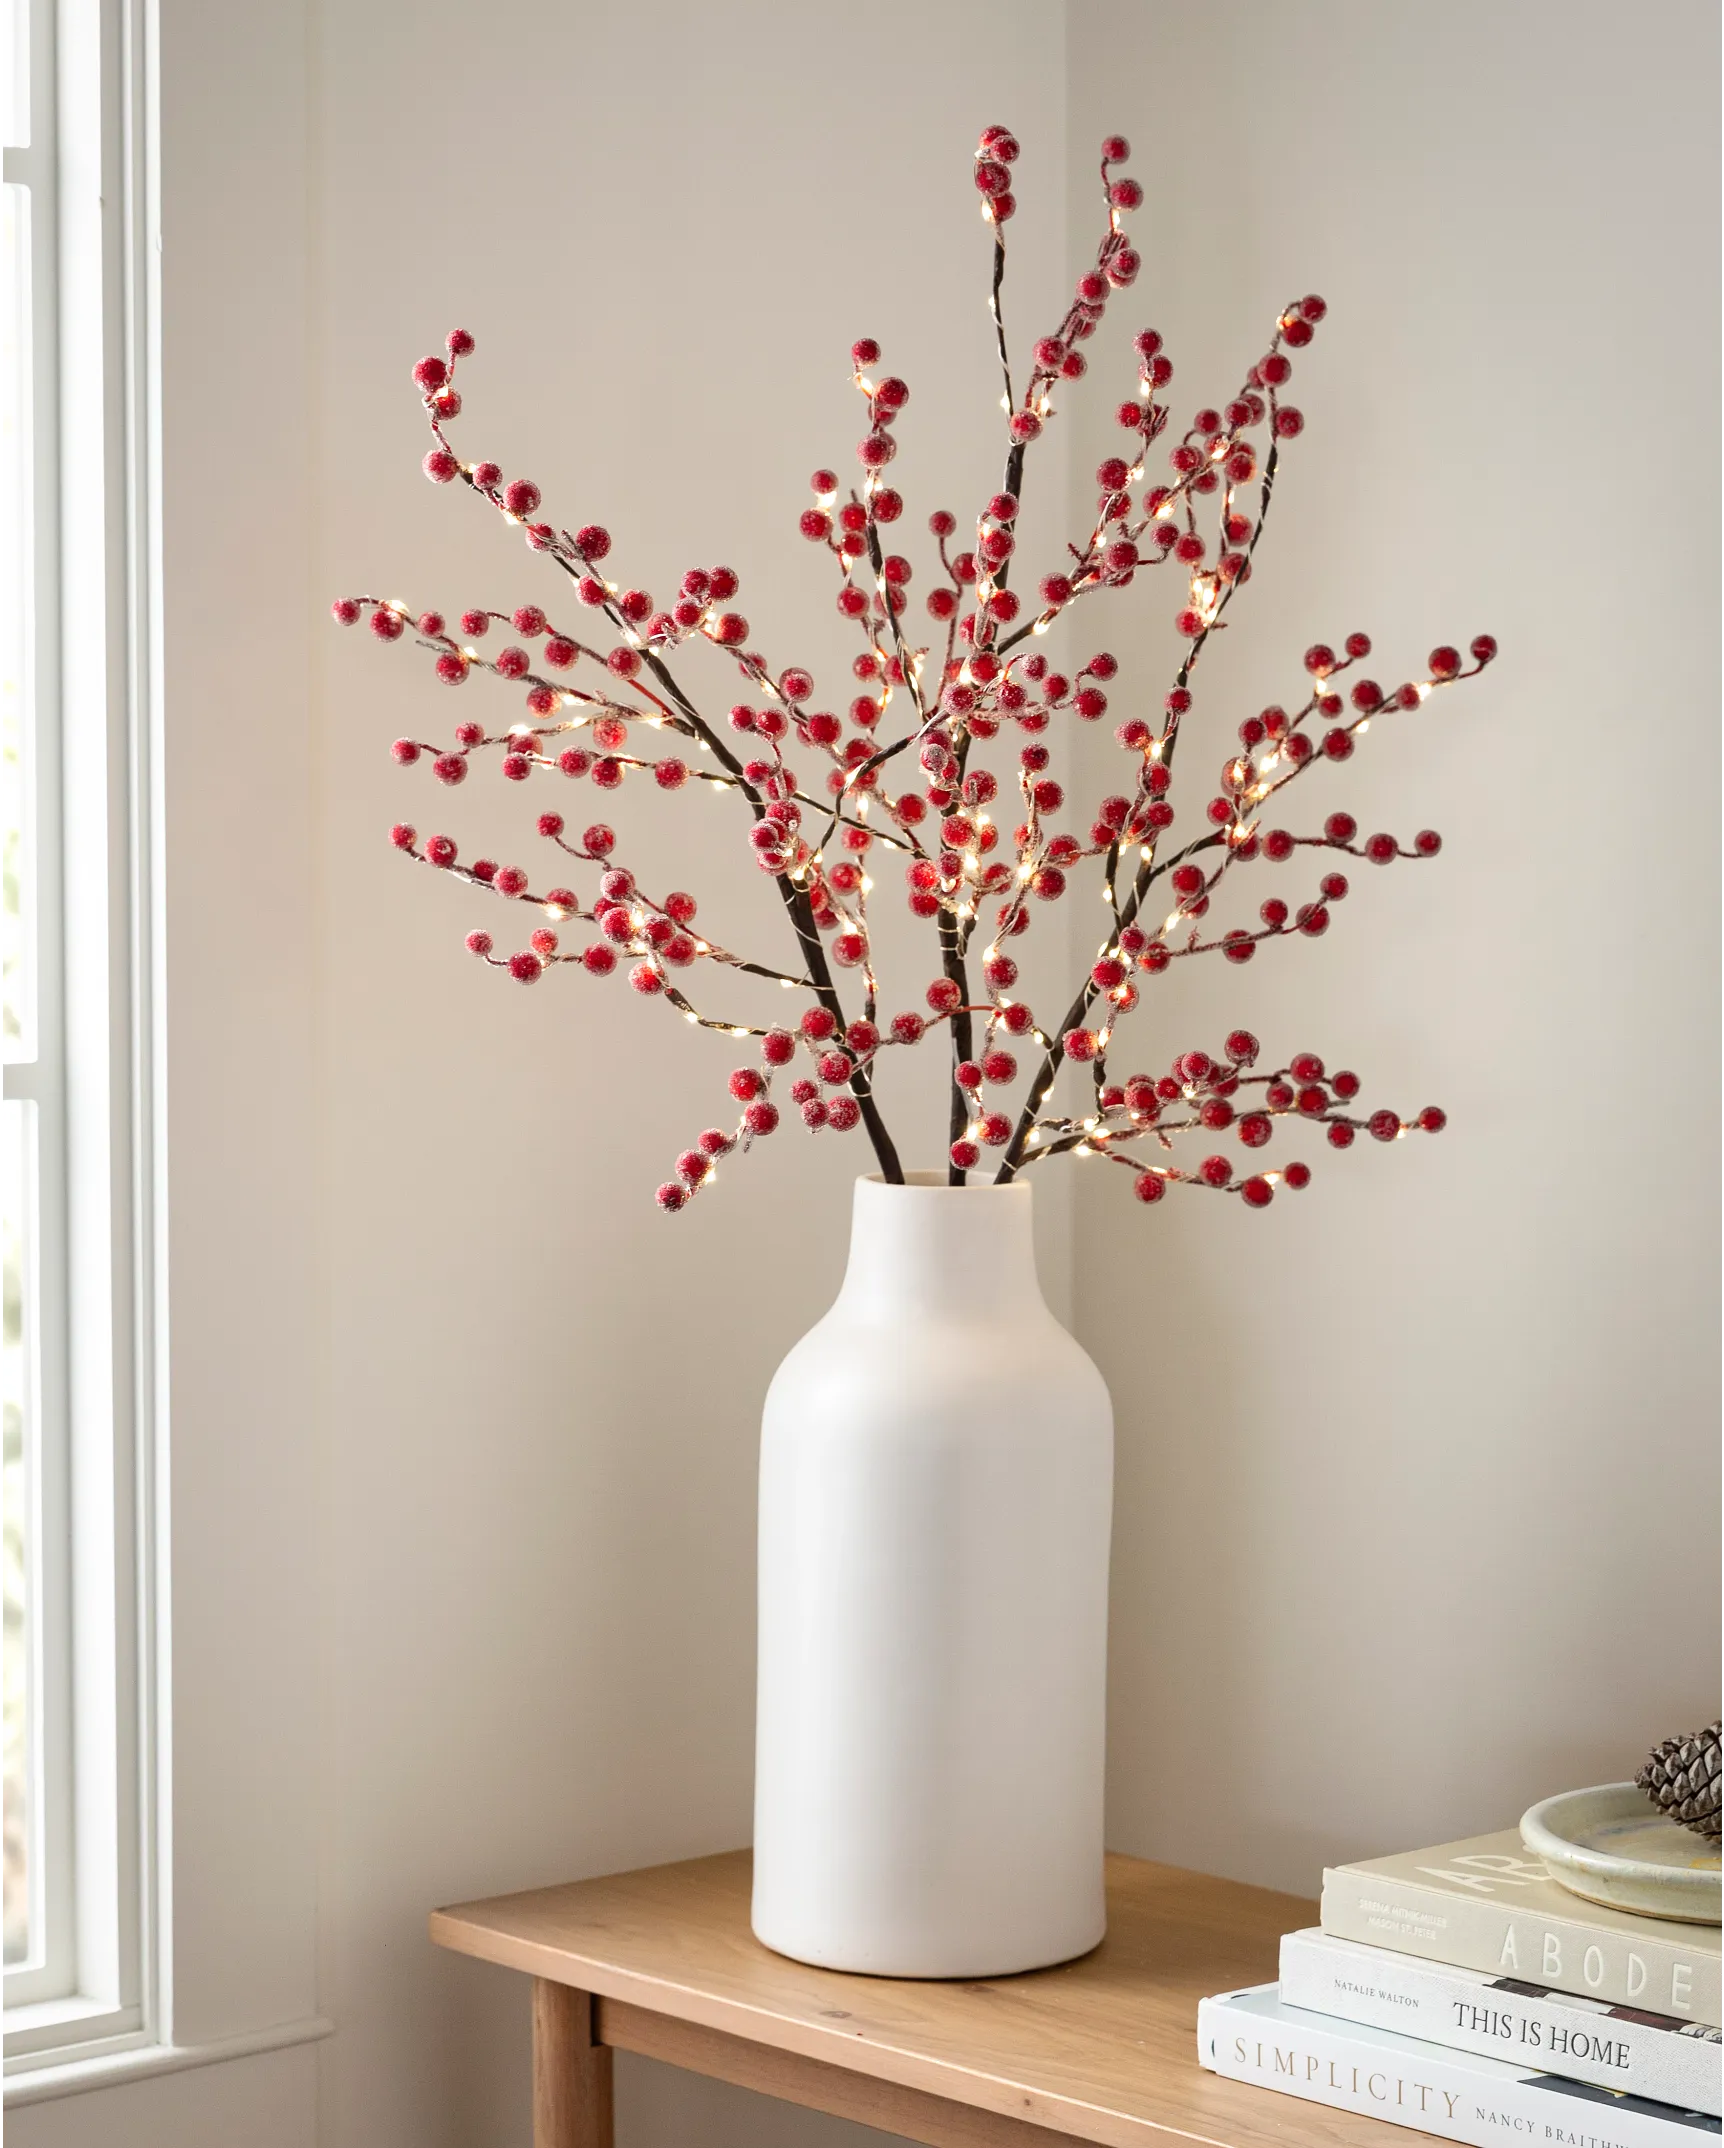 Red Berry Garland Lighted Burgundy Berry Christmas Garland Artificial Berry